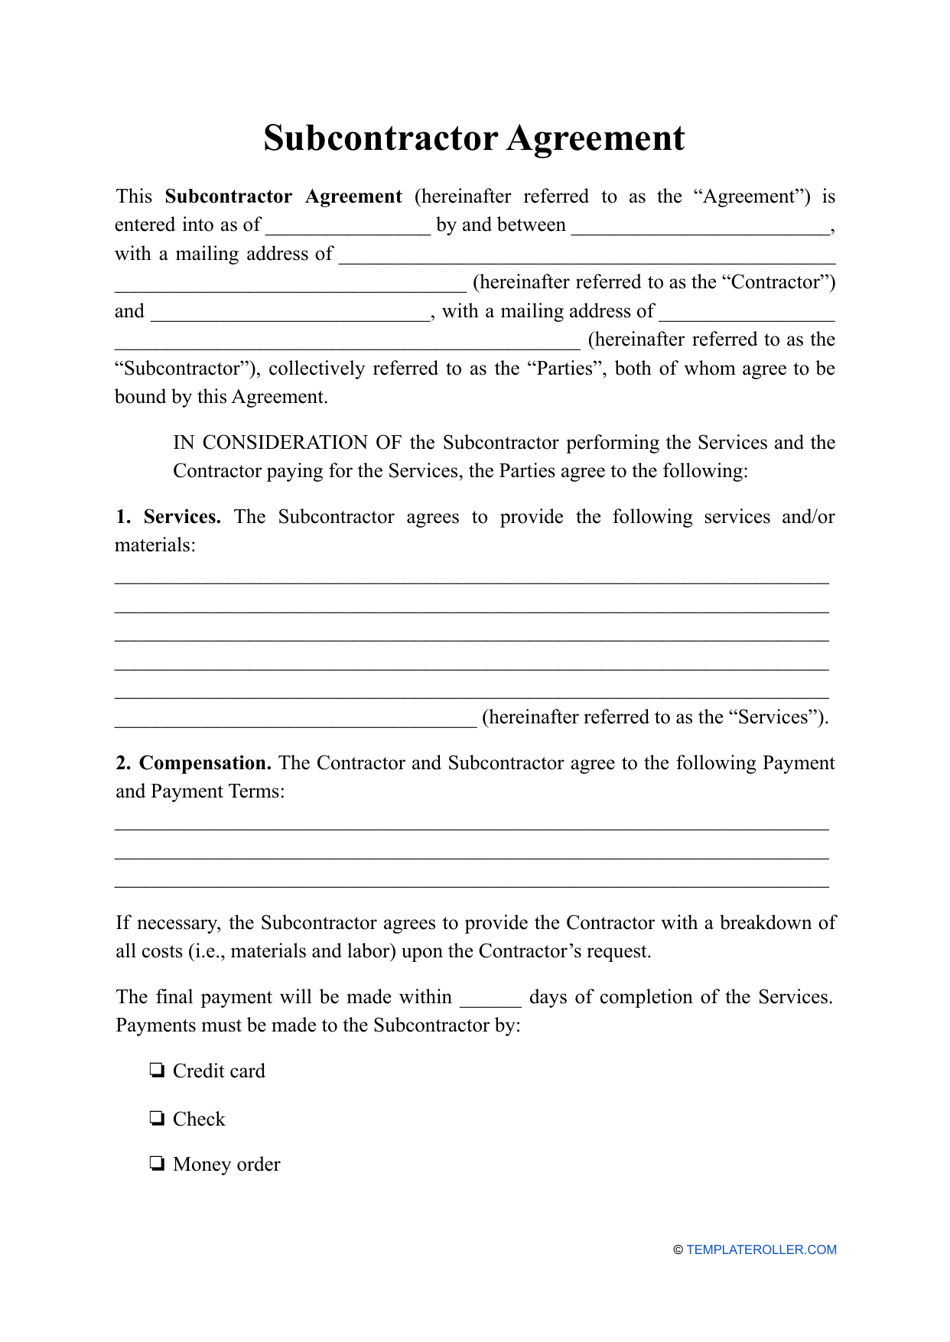 subcontractor-agreement-template-fill-out-sign-online-and-download-pdf-templateroller